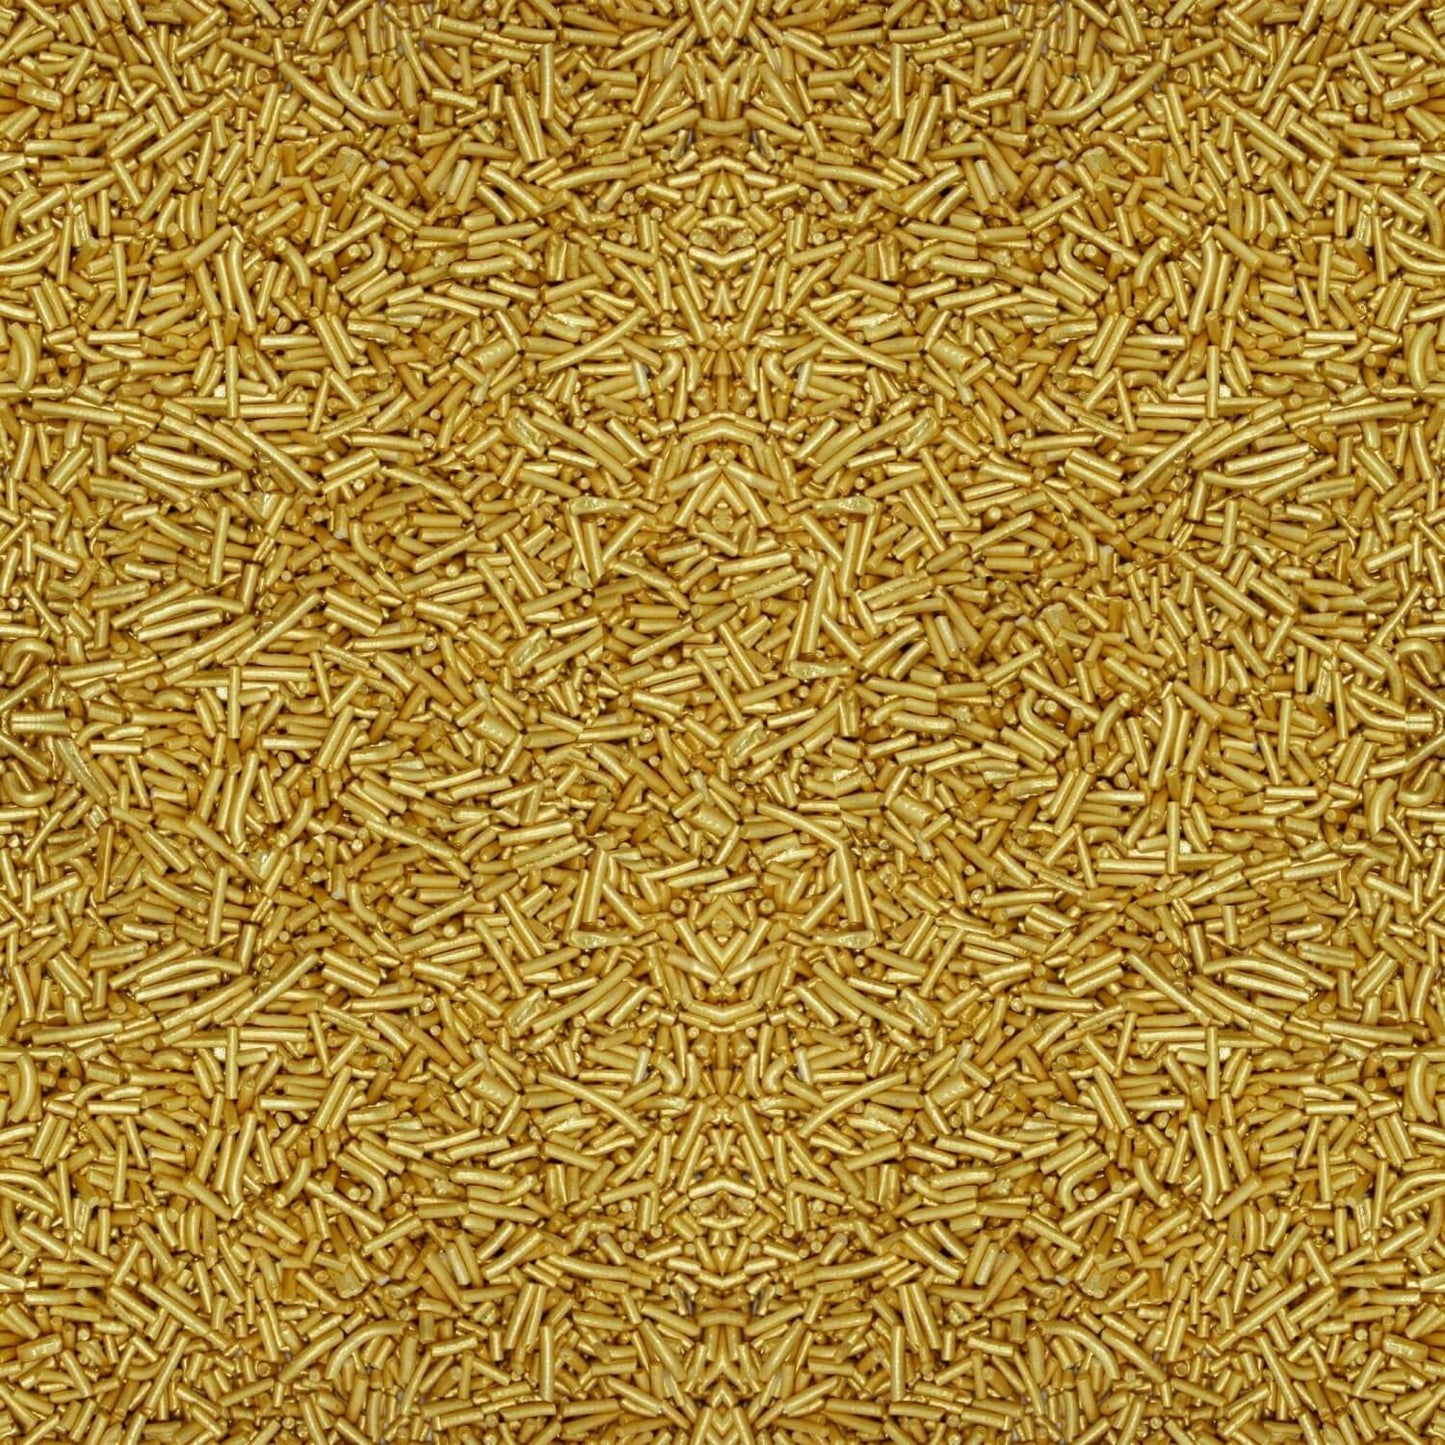 Confect English Gold Vermicelli Sprinkles 100 Gms